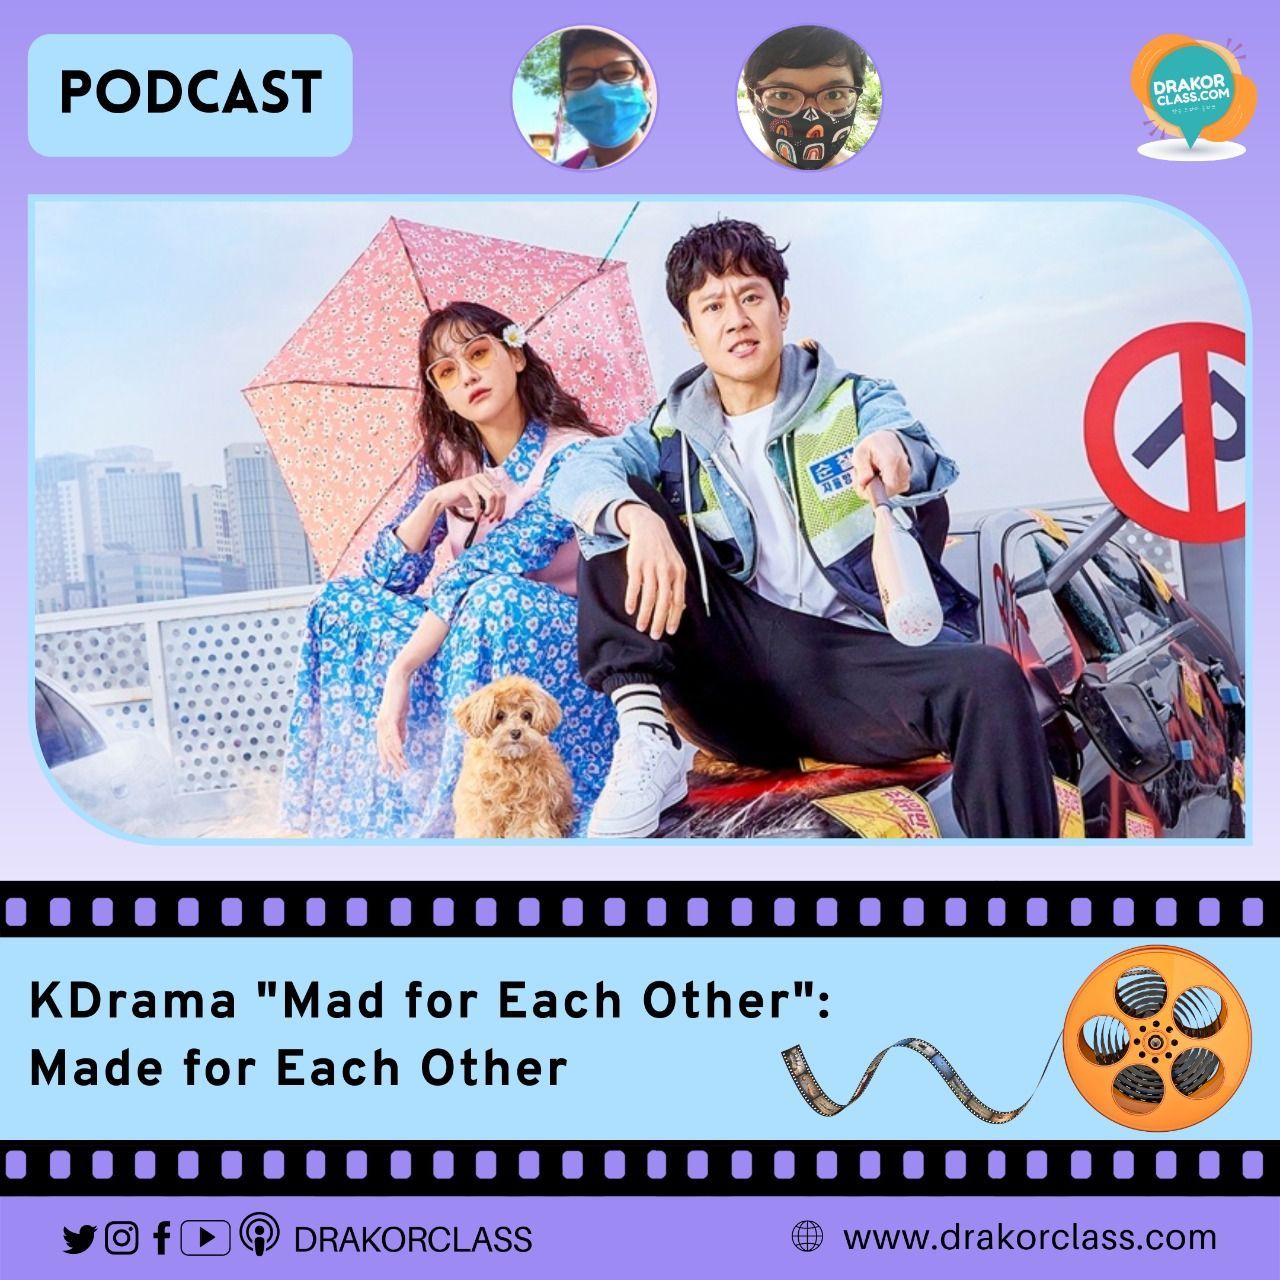 Podcast K-Drama "Mad for Each Other"